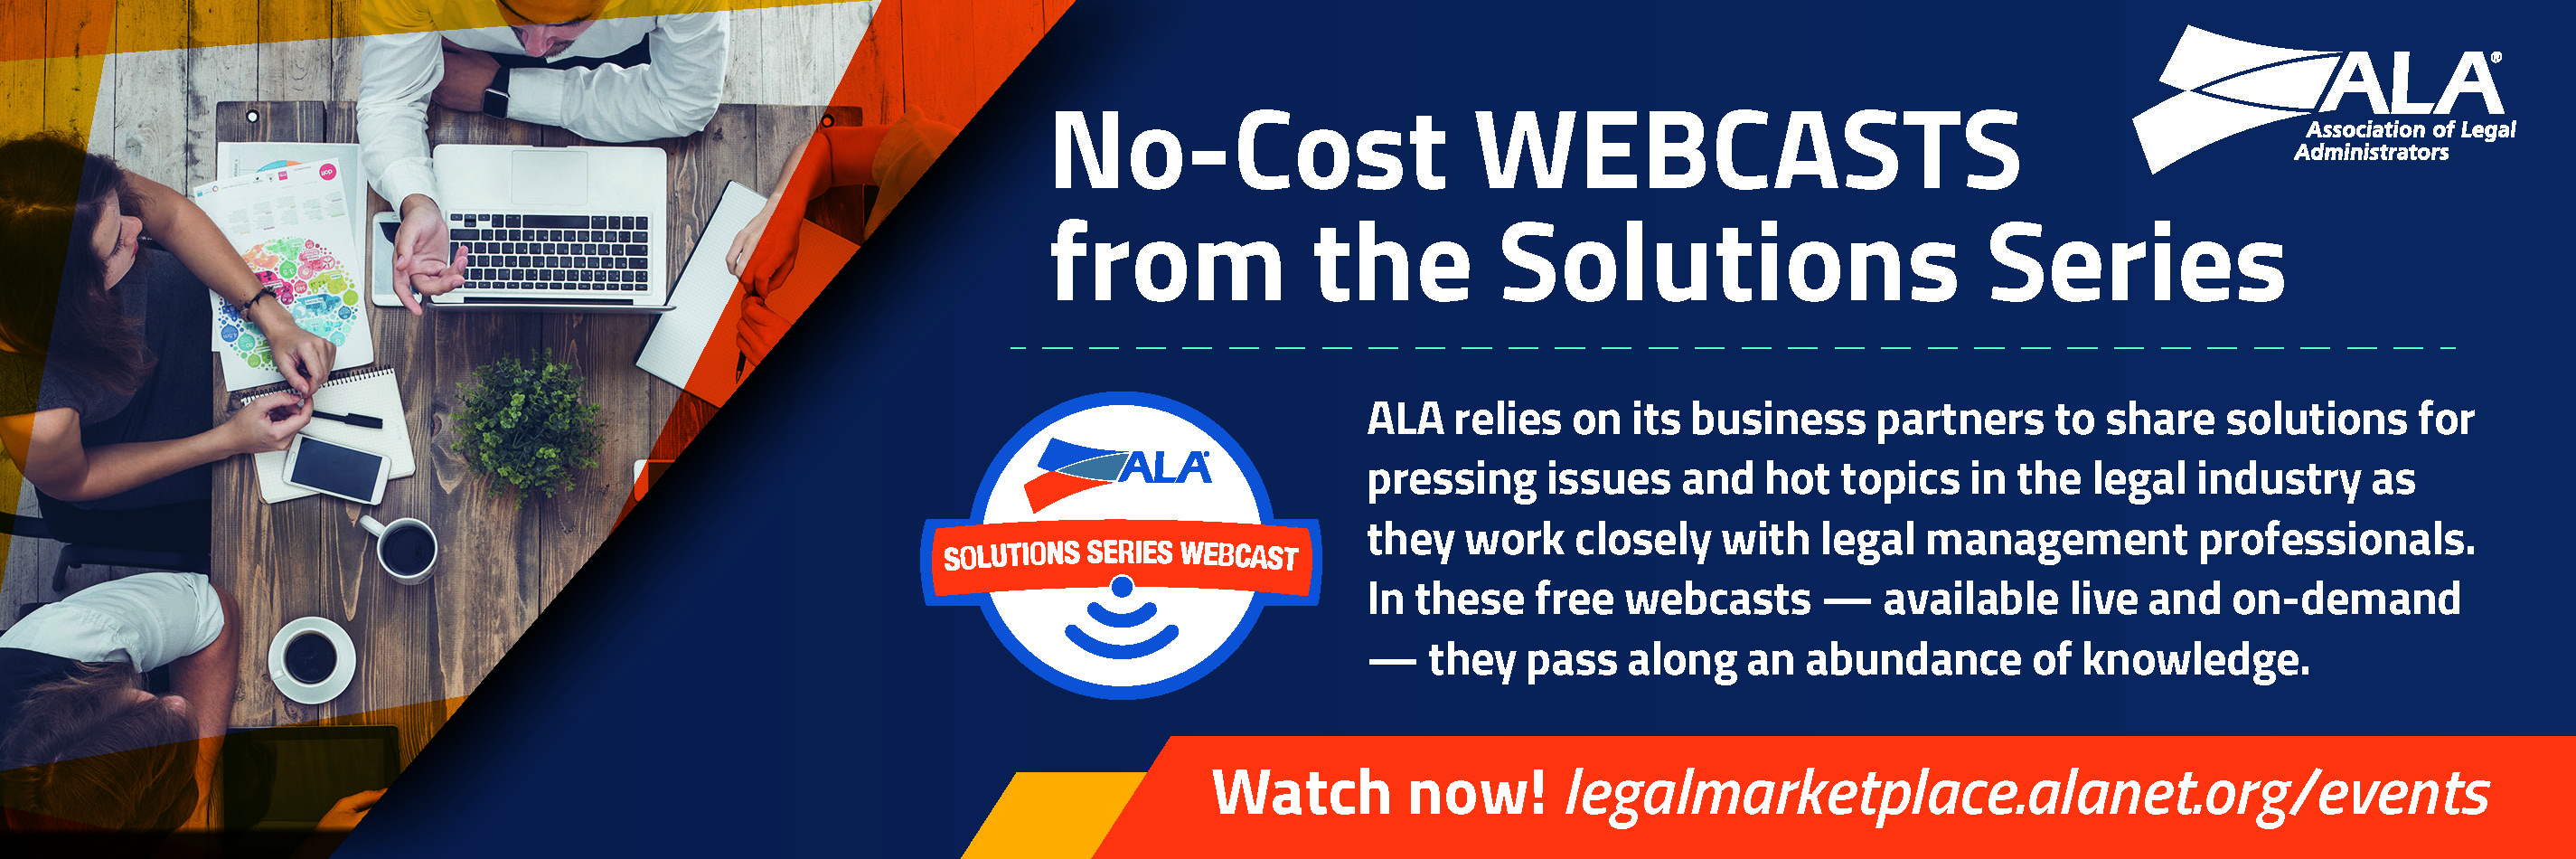 Solutions Series Webcasts